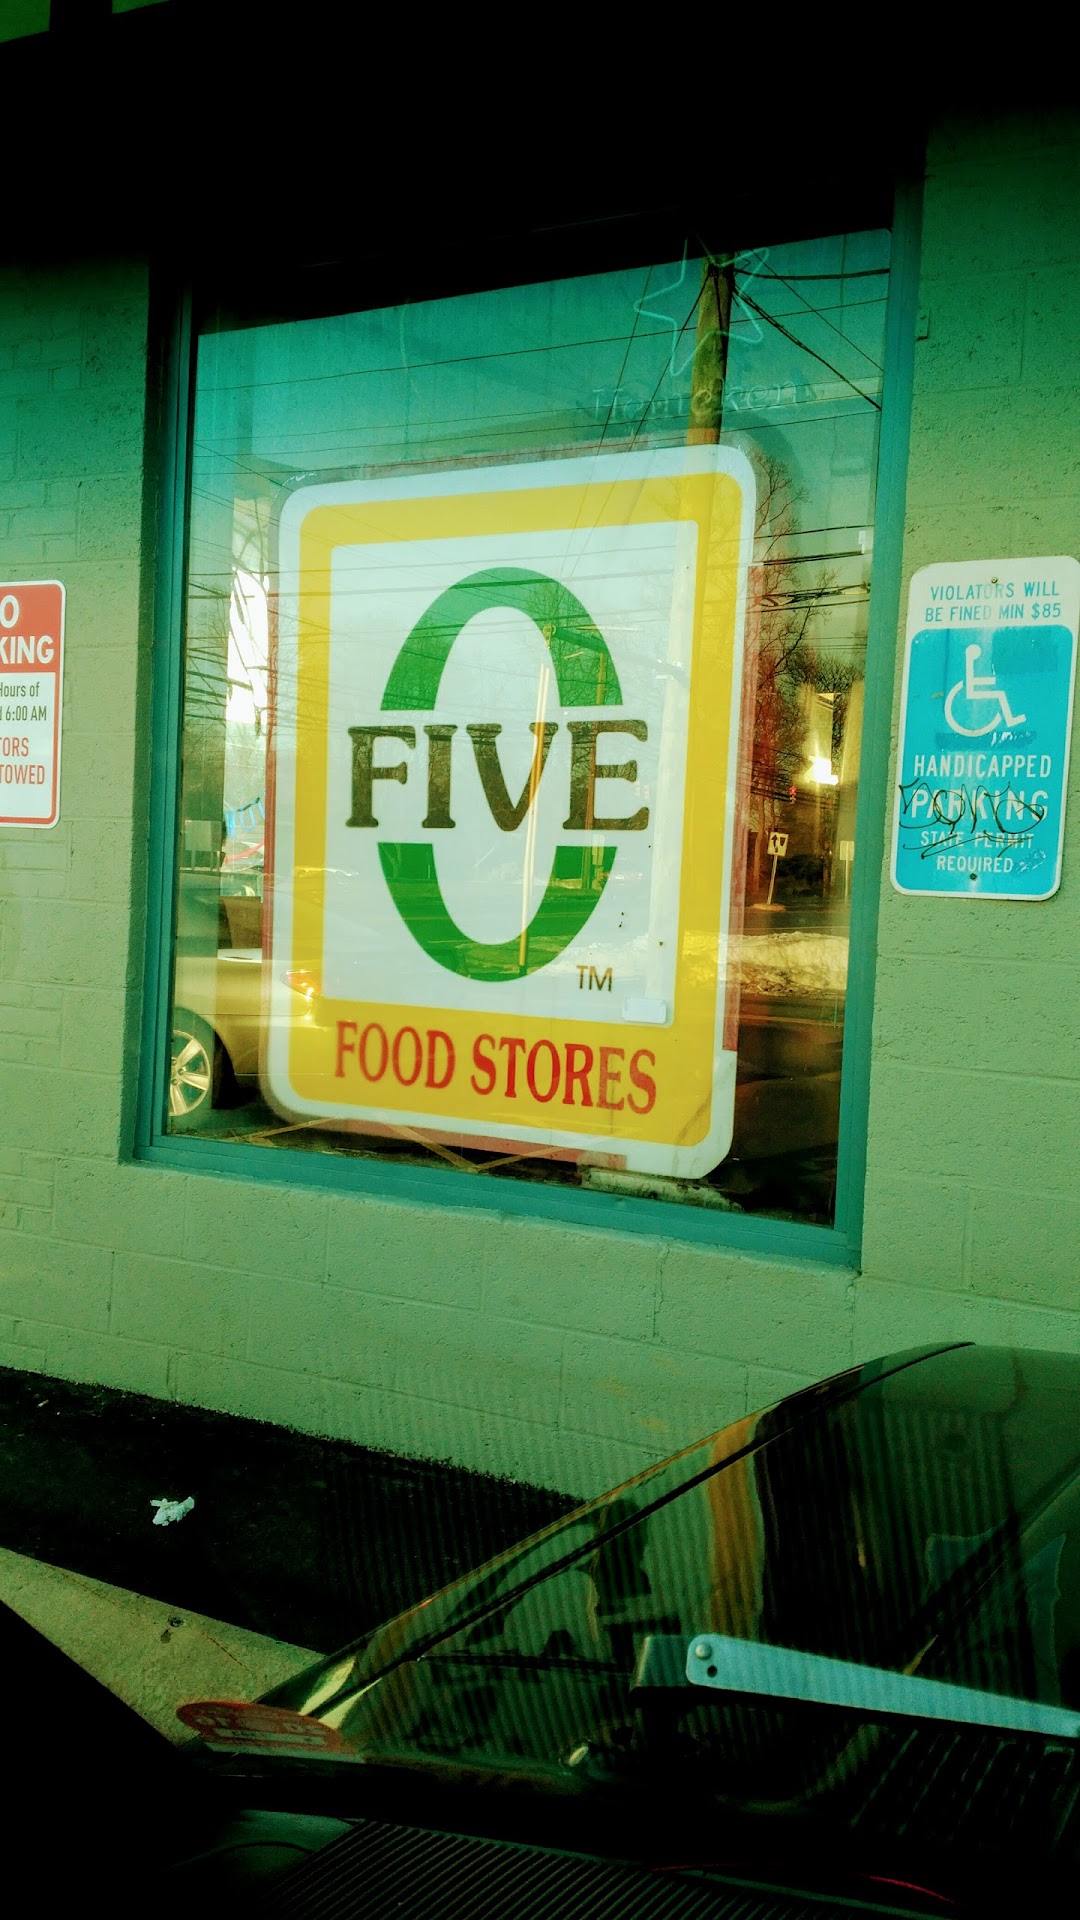 Five O Food Stores